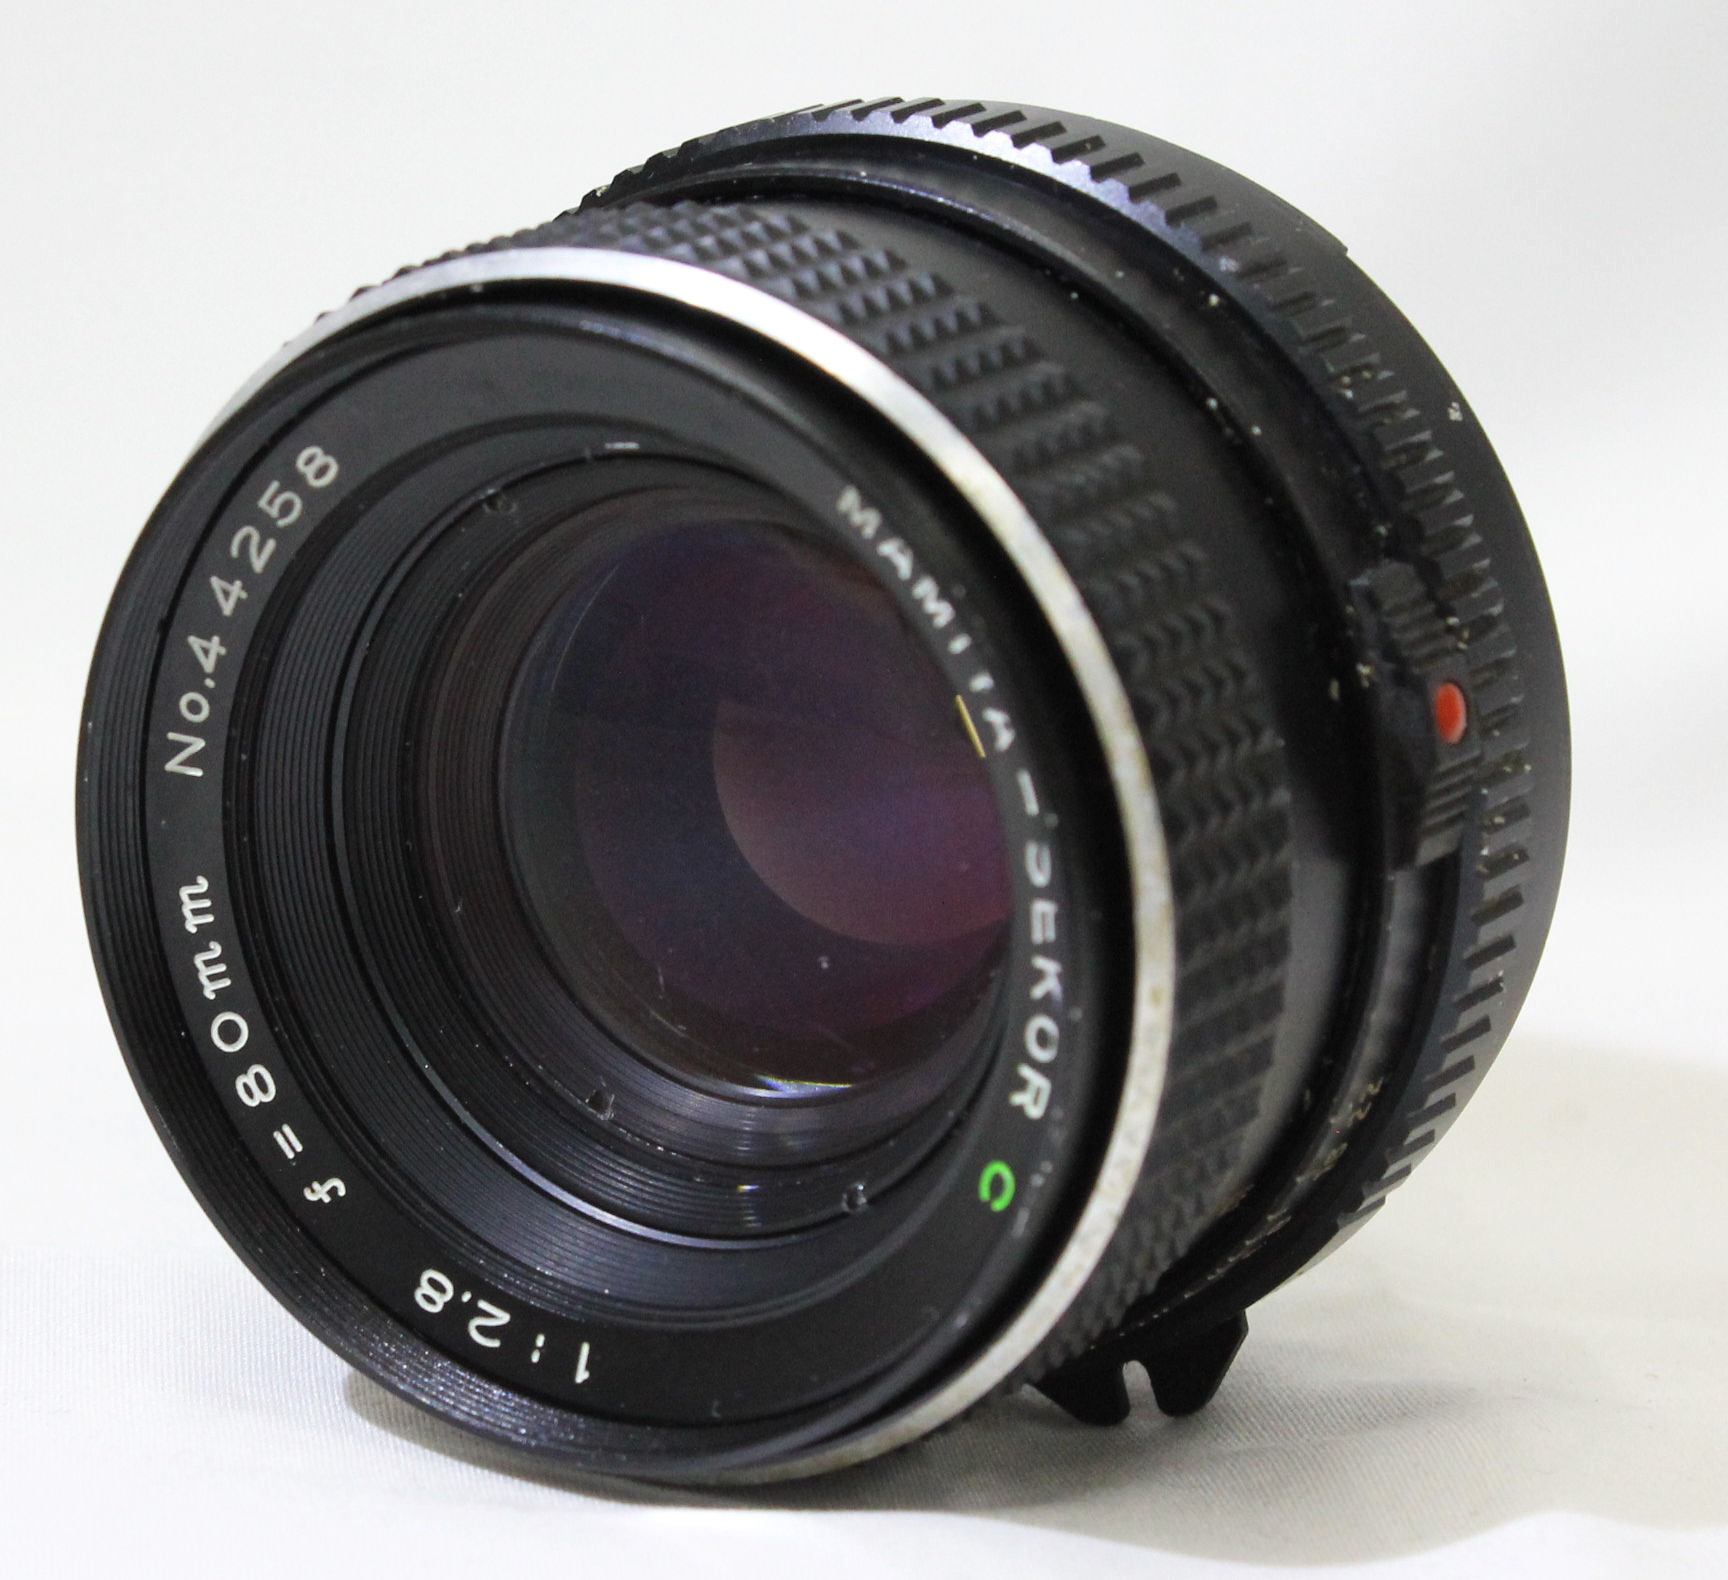 [Excellent] Mamiya Sekor C 80mm F/2.8 MF Lens for M645 1000S 645 Super Pro TL from Japan 